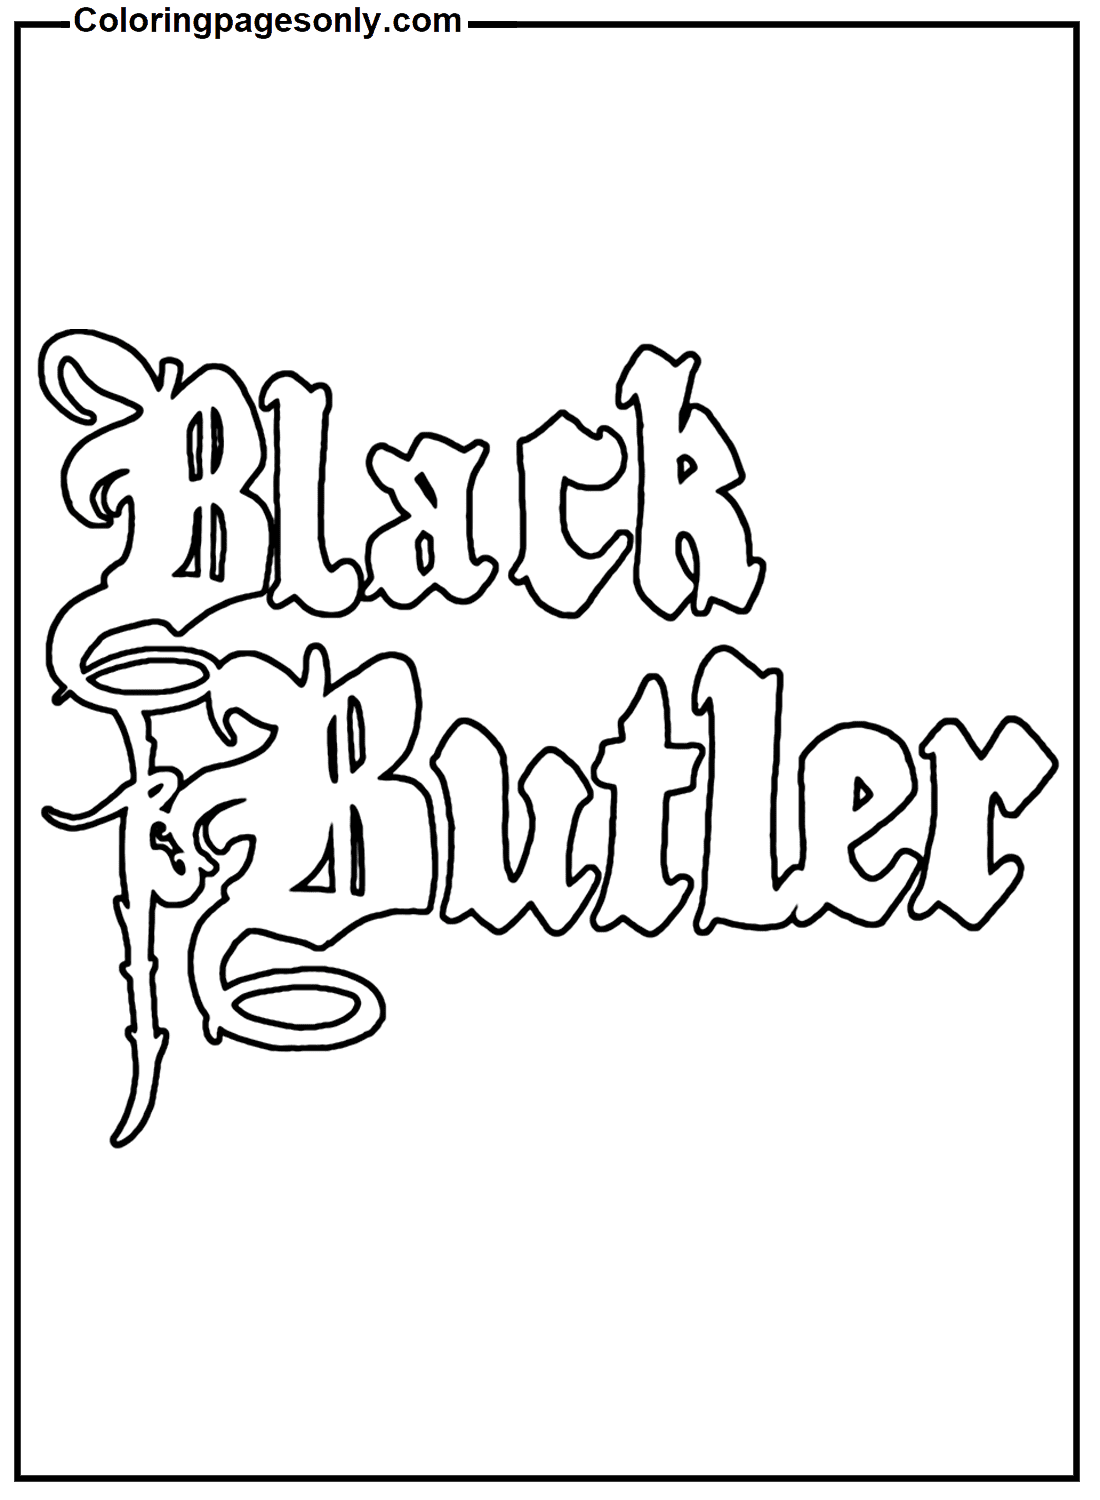 Black Butler 标志 Coloring Page